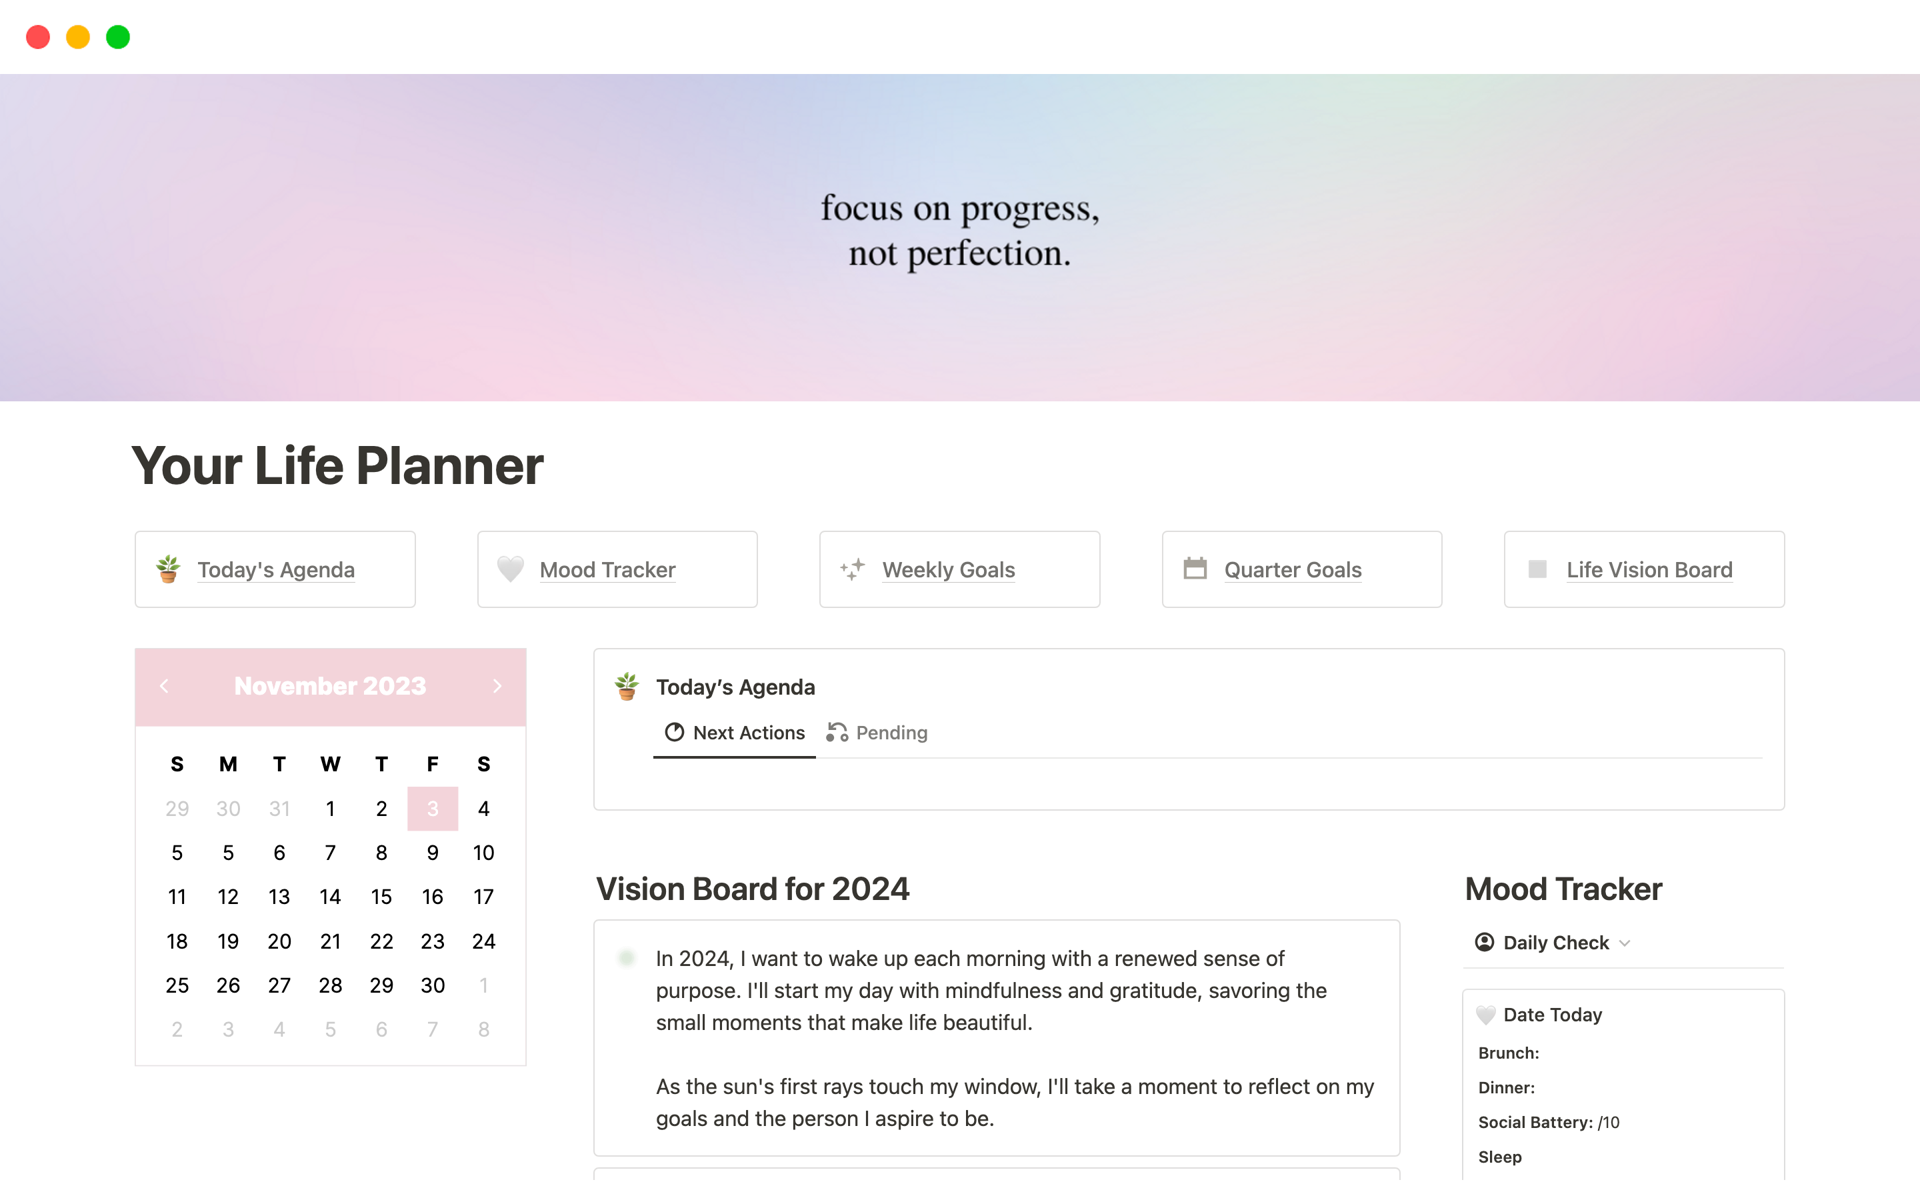 This Notion Life Planner Template removes the difficulty in planning by helping you plan with intention.